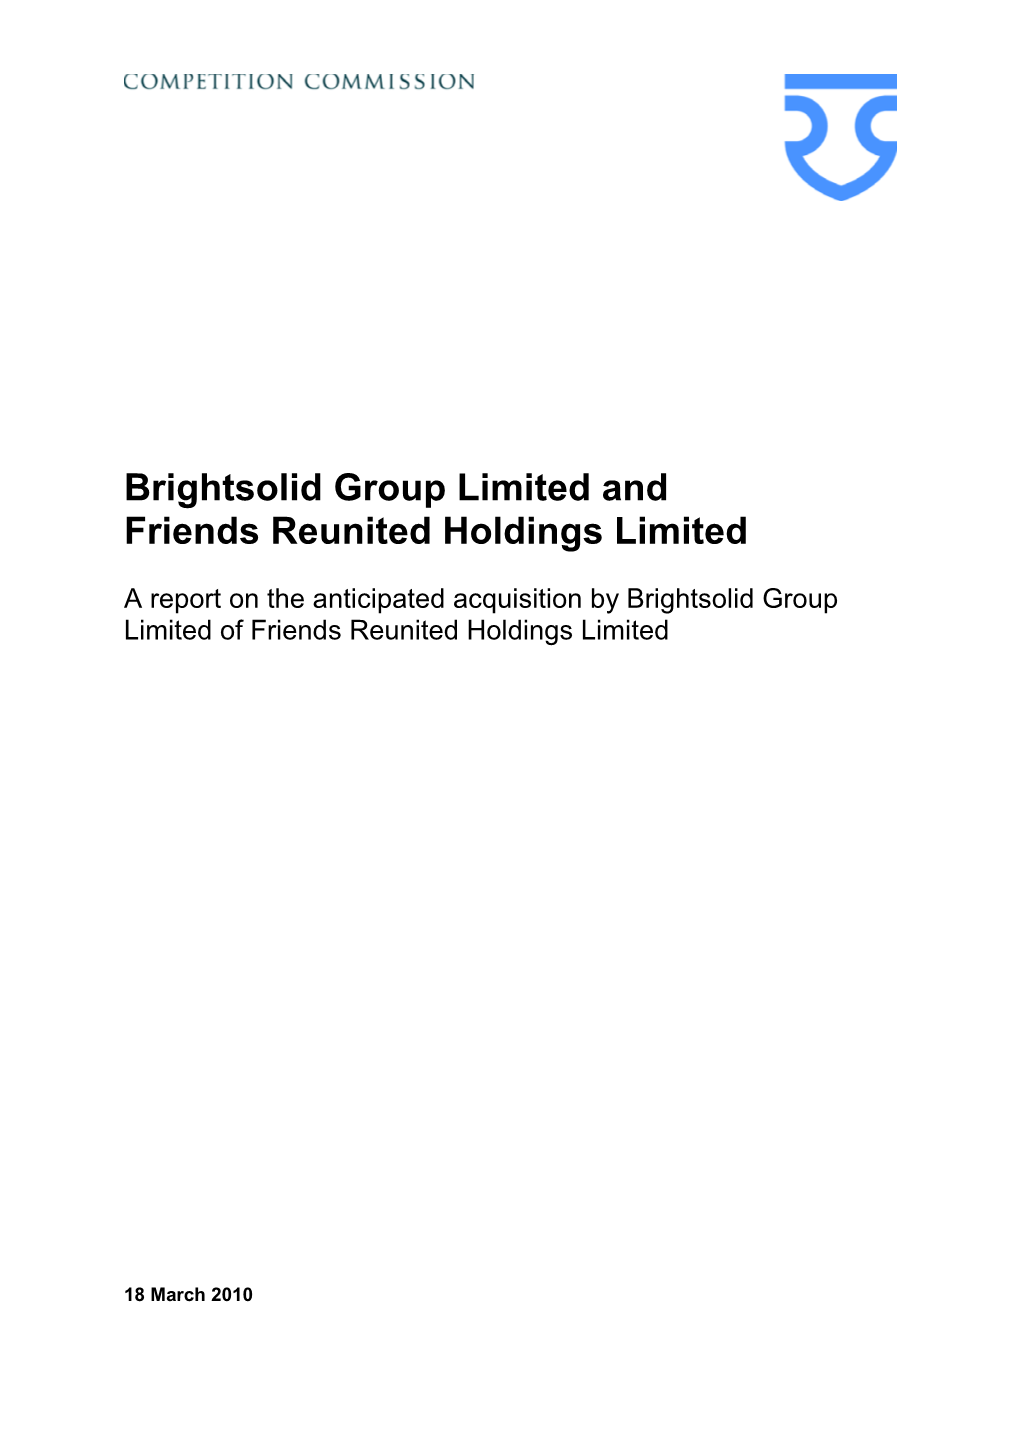 Brightsolid Group Limited and Friends Reunited Holdings Limited